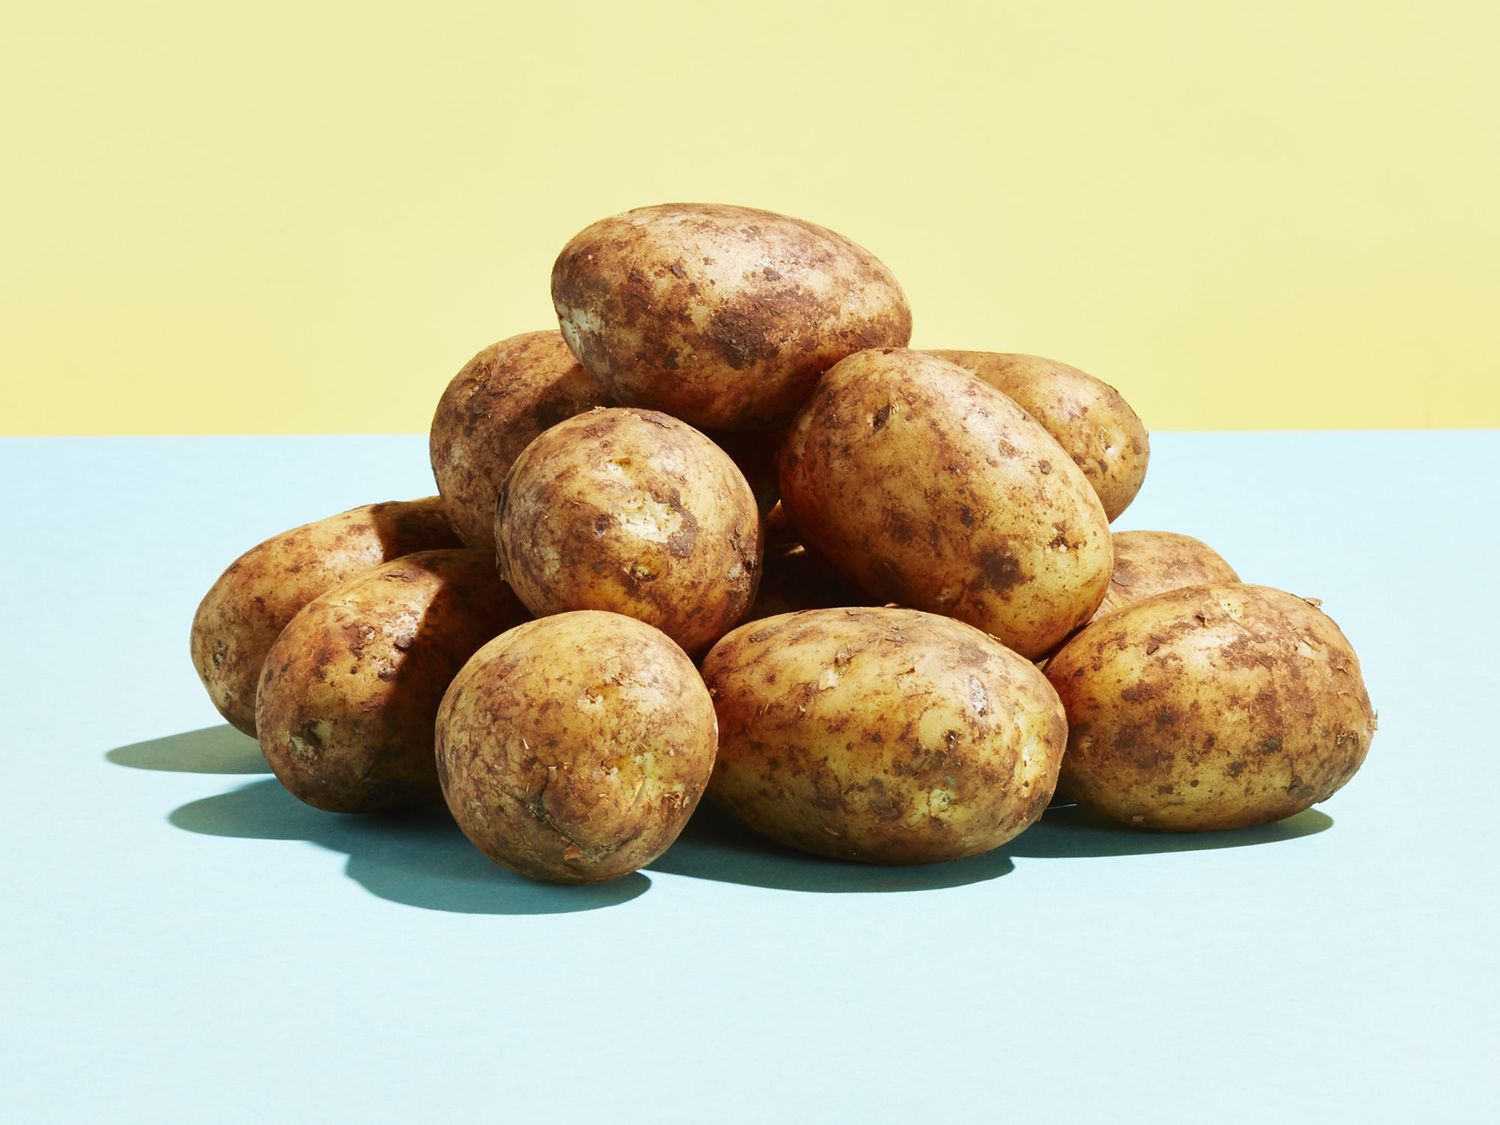 A pile of potatoes on a table top